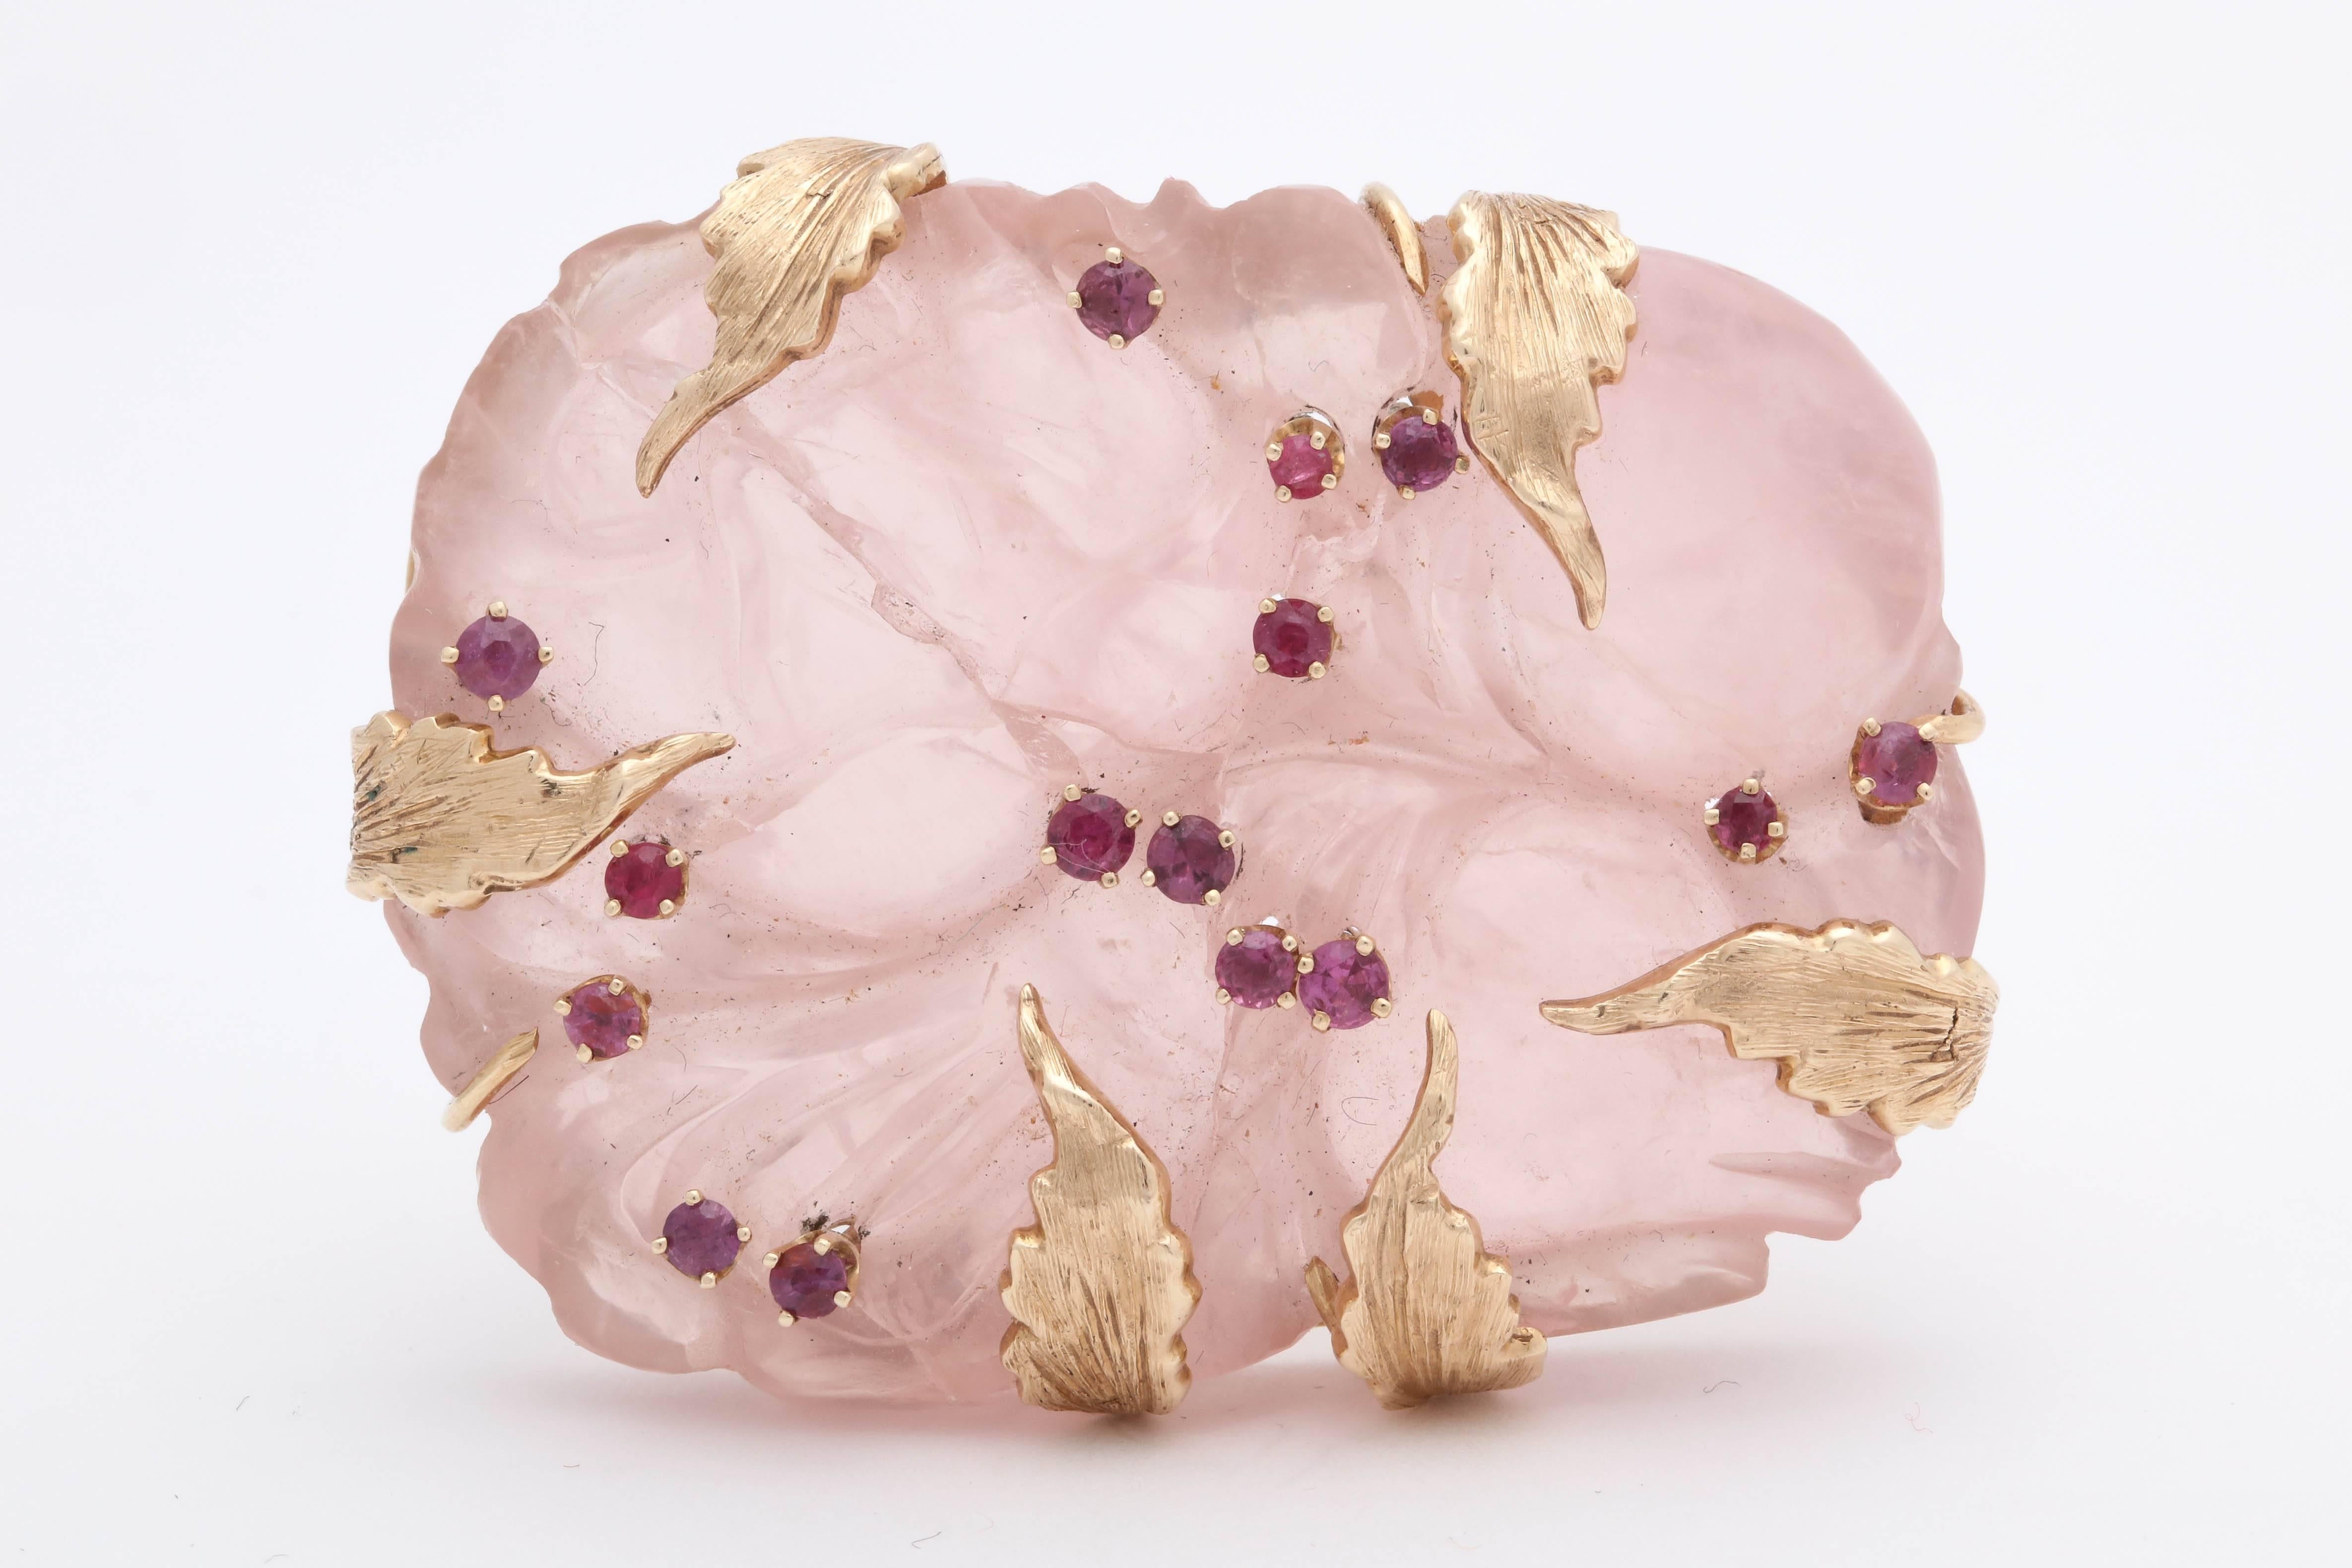 One Ladies 14kt Yellow Gold Brooch Featuring A Large 55Mm Hand Carved Rose Quartz Stone. Brooch Is Embelished With Six Gold Leaf Pieces Within The Design Of The Rose Quartz.Brooch Is Also Embellished with 15 Faceted Rubies Weighing approximately